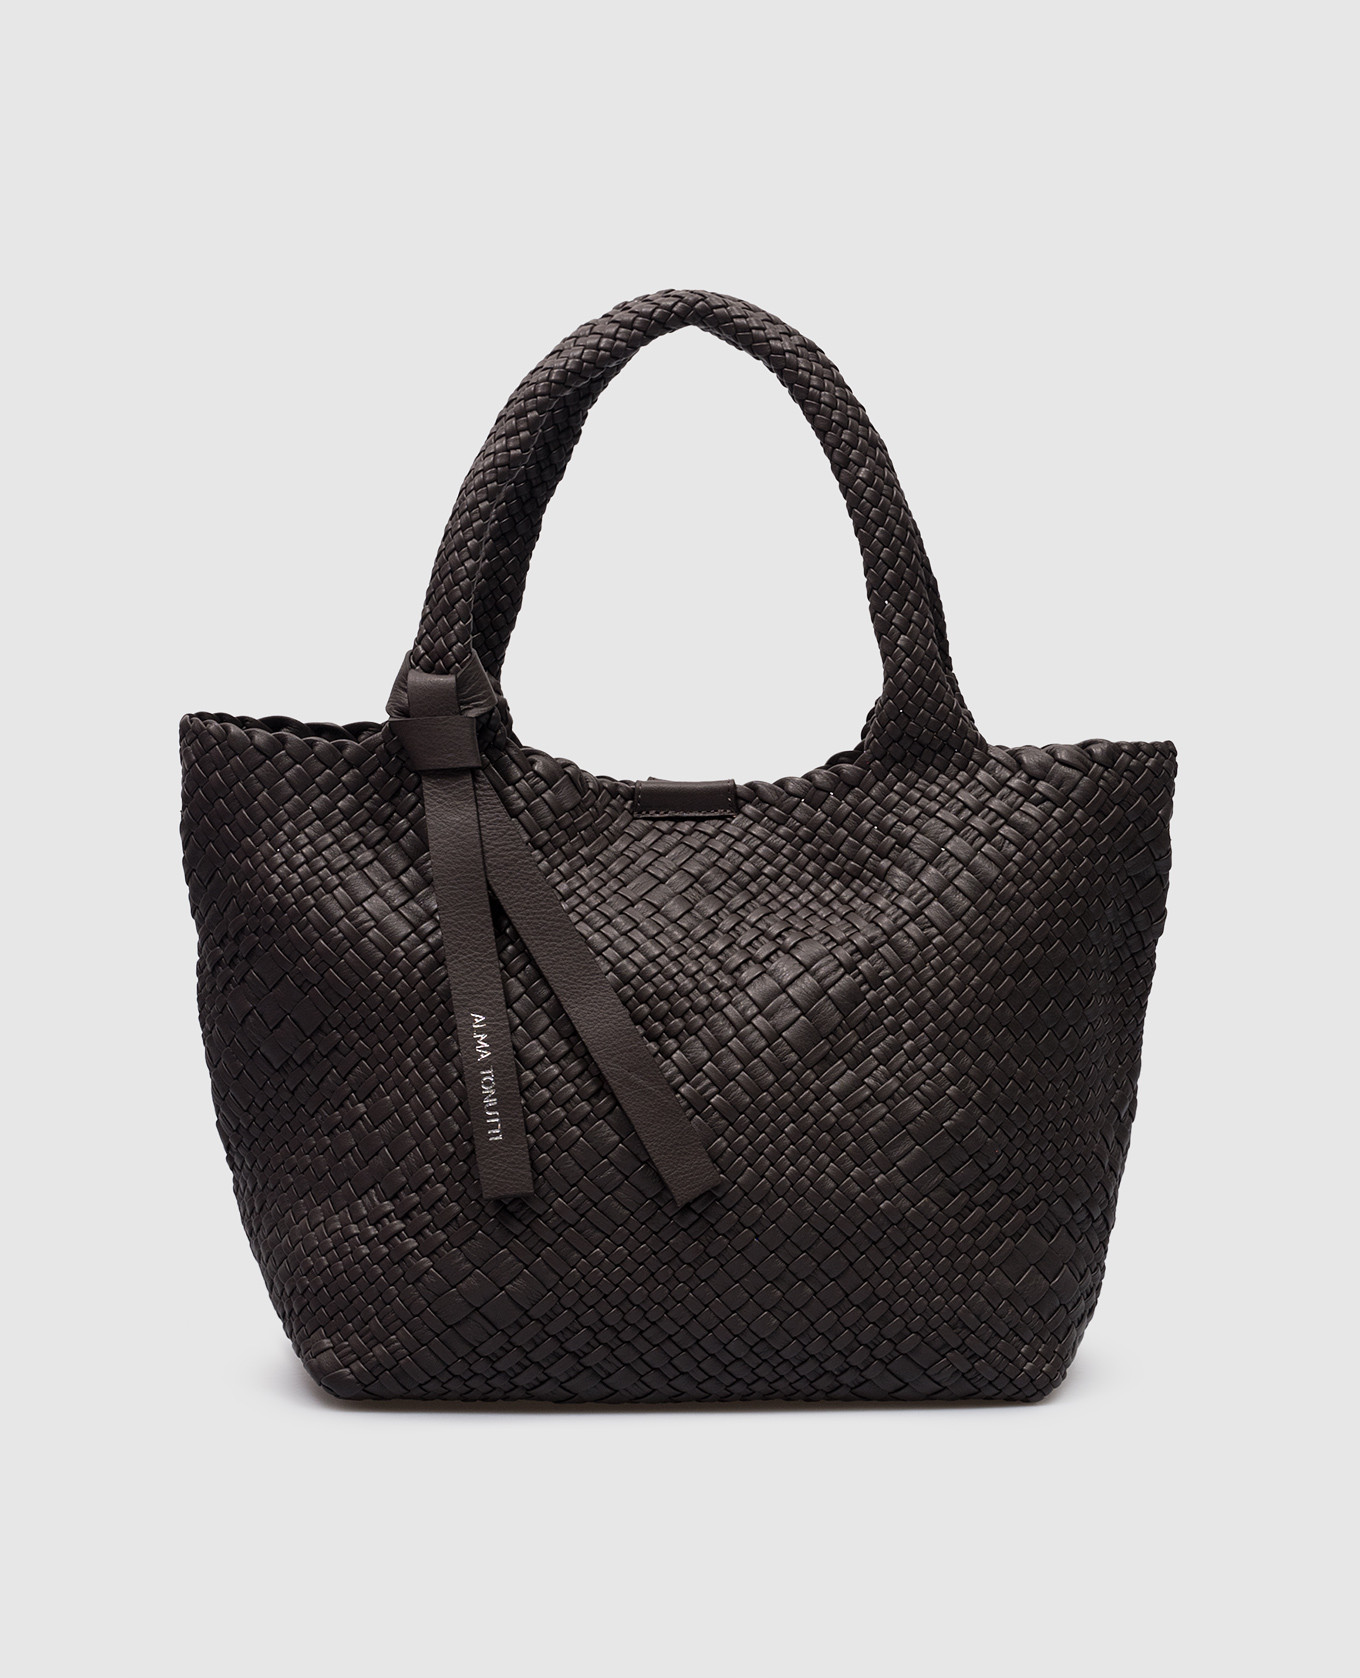 Brown leather woven tote bag